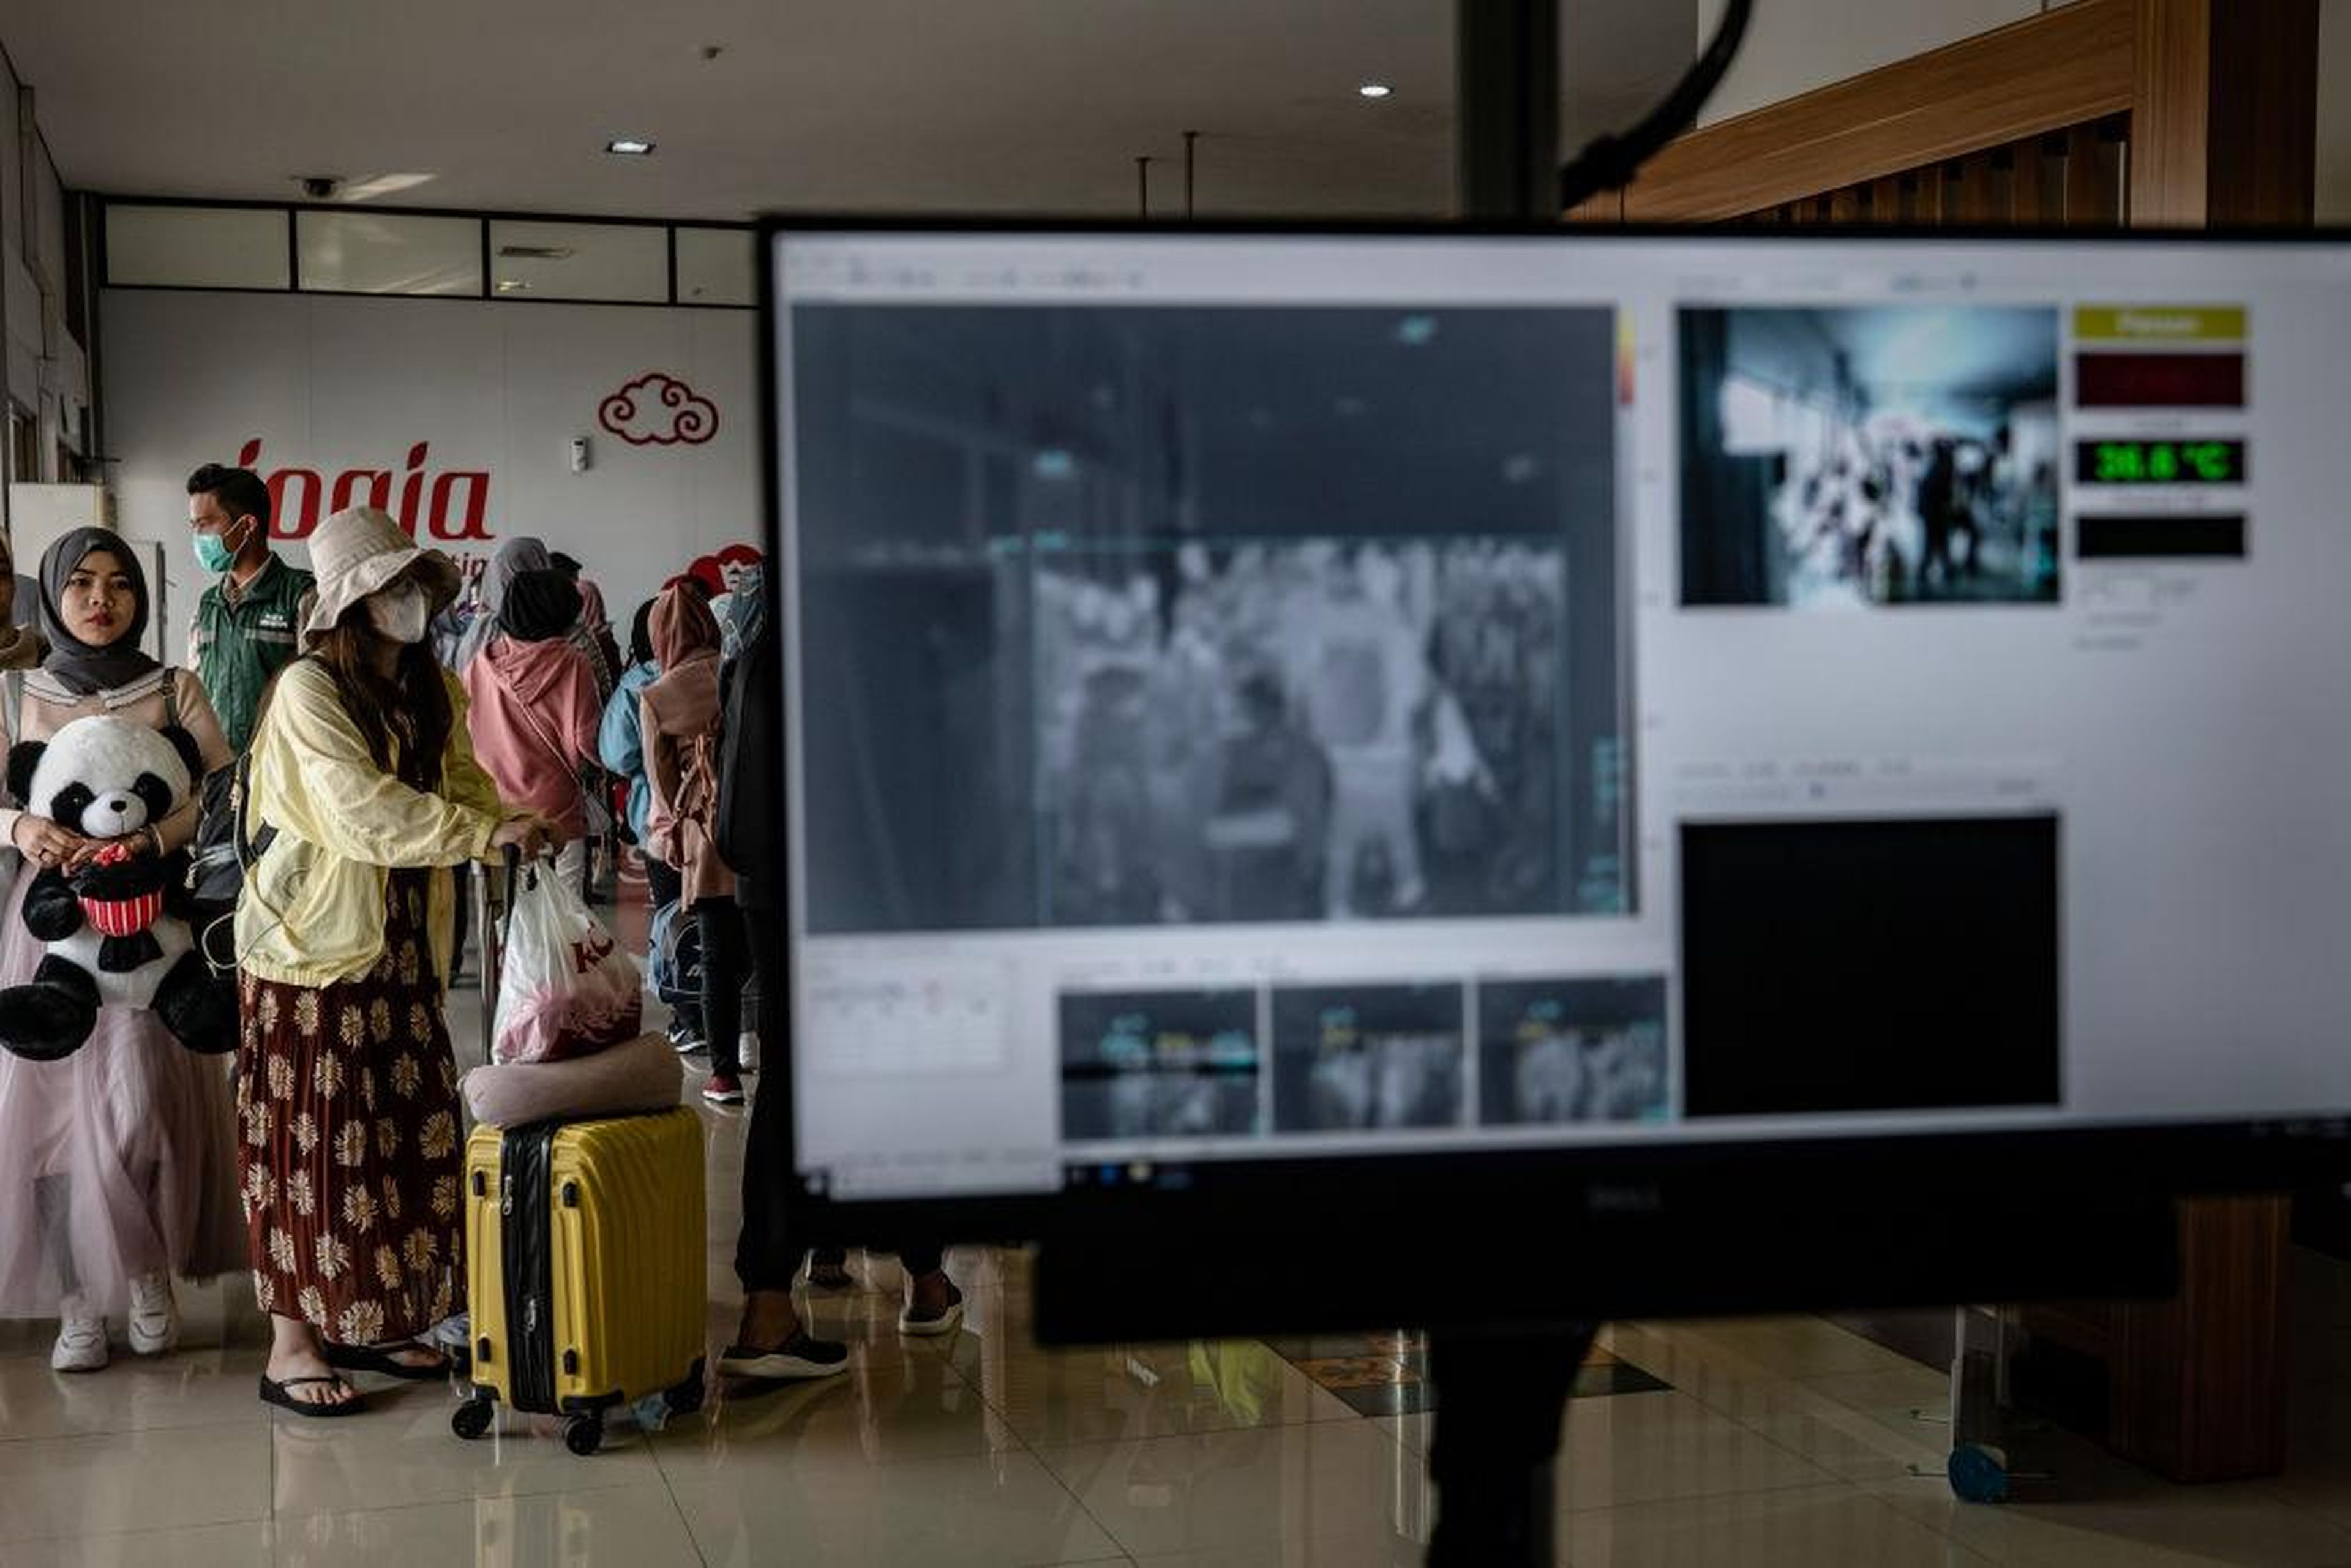 Passengers from an international flight have their temperature checked as they pass a thermal scanner monitor upon arrival at the Adisucipto International Airport on January 23, 2020 in Yogyakarta, Indonesia.